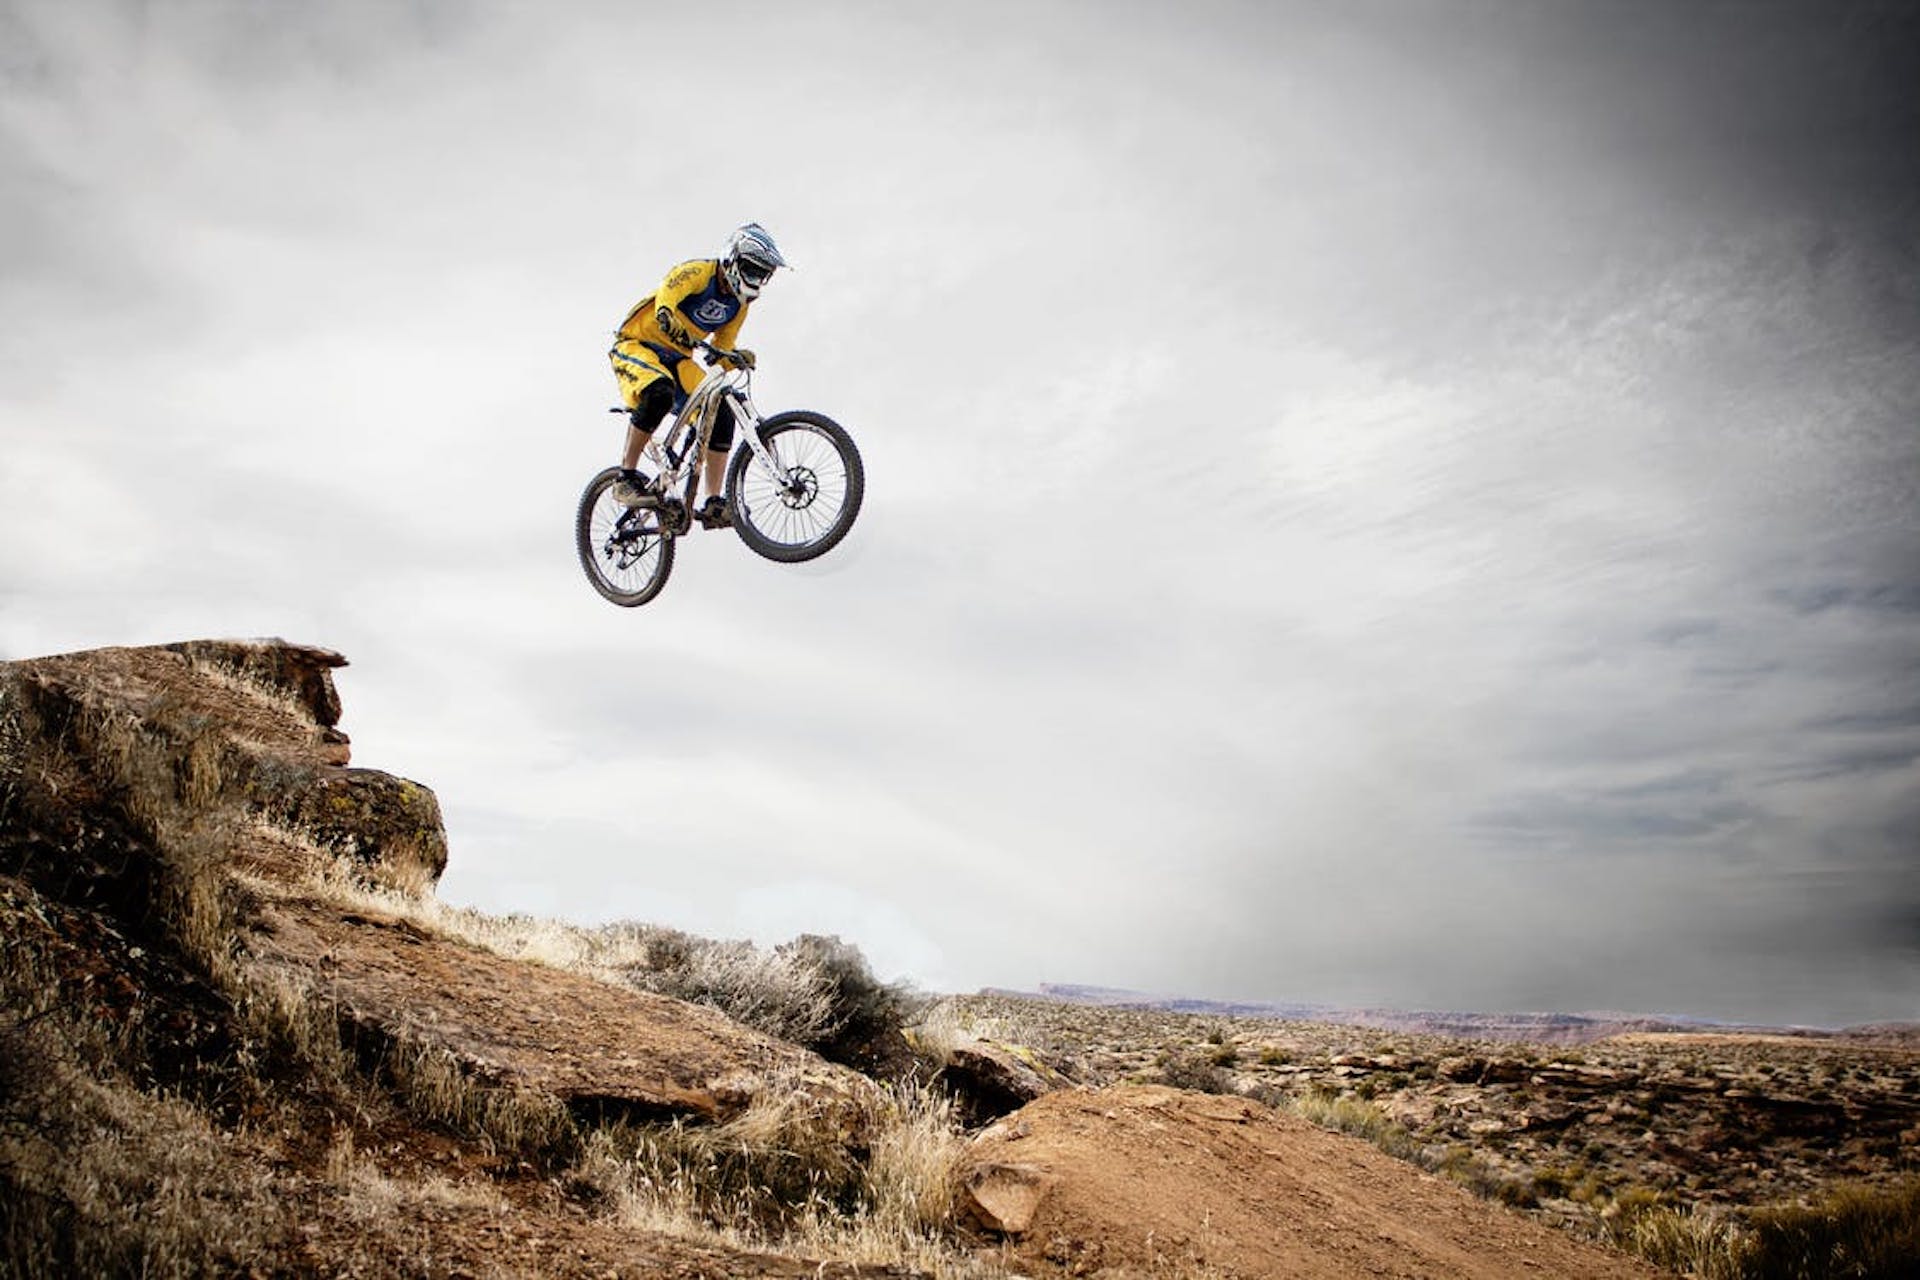 jumping a hill on a mountain bike in the desert